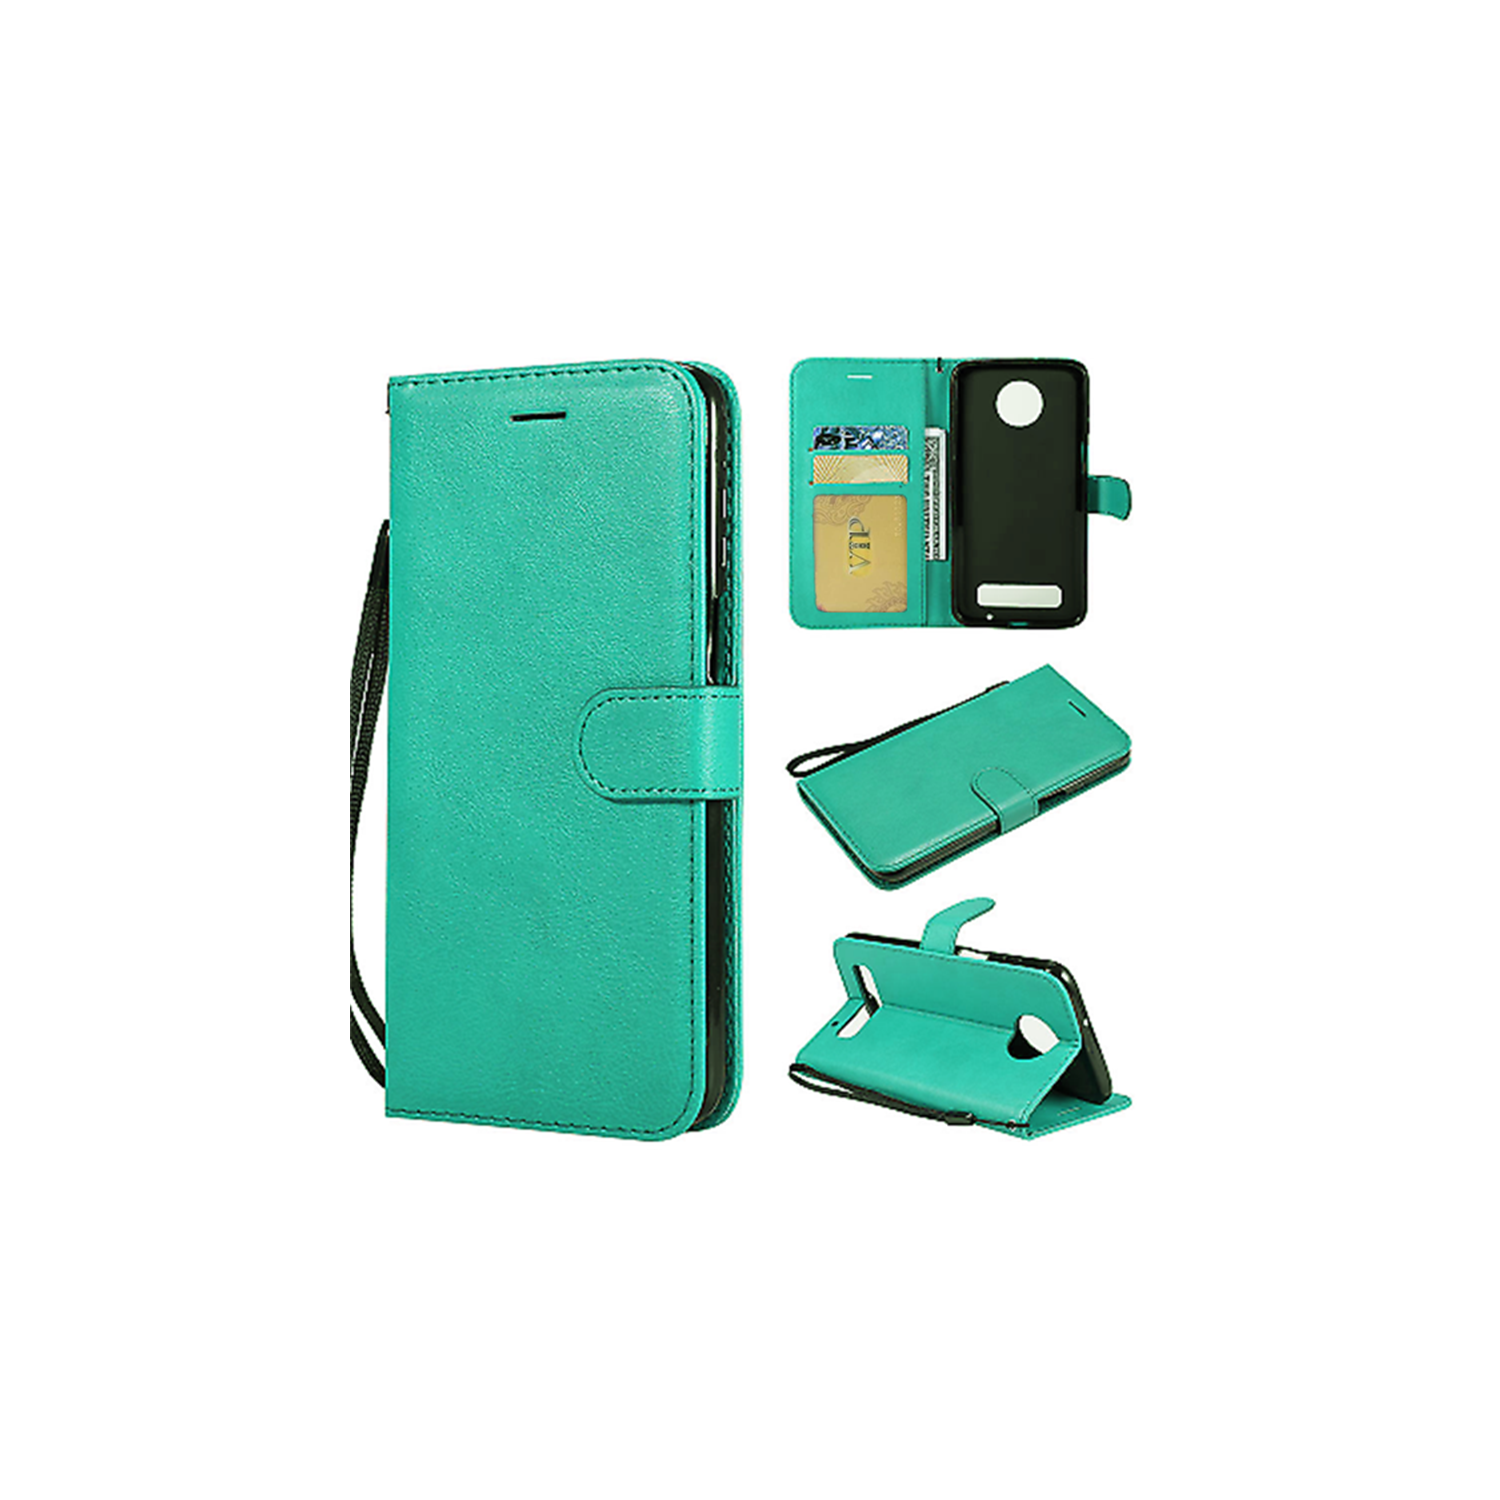 [CS] Motorola Moto Z3 Play Case, Magnetic Leather Folio Wallet Flip Case Cover with Card Slot, Teal